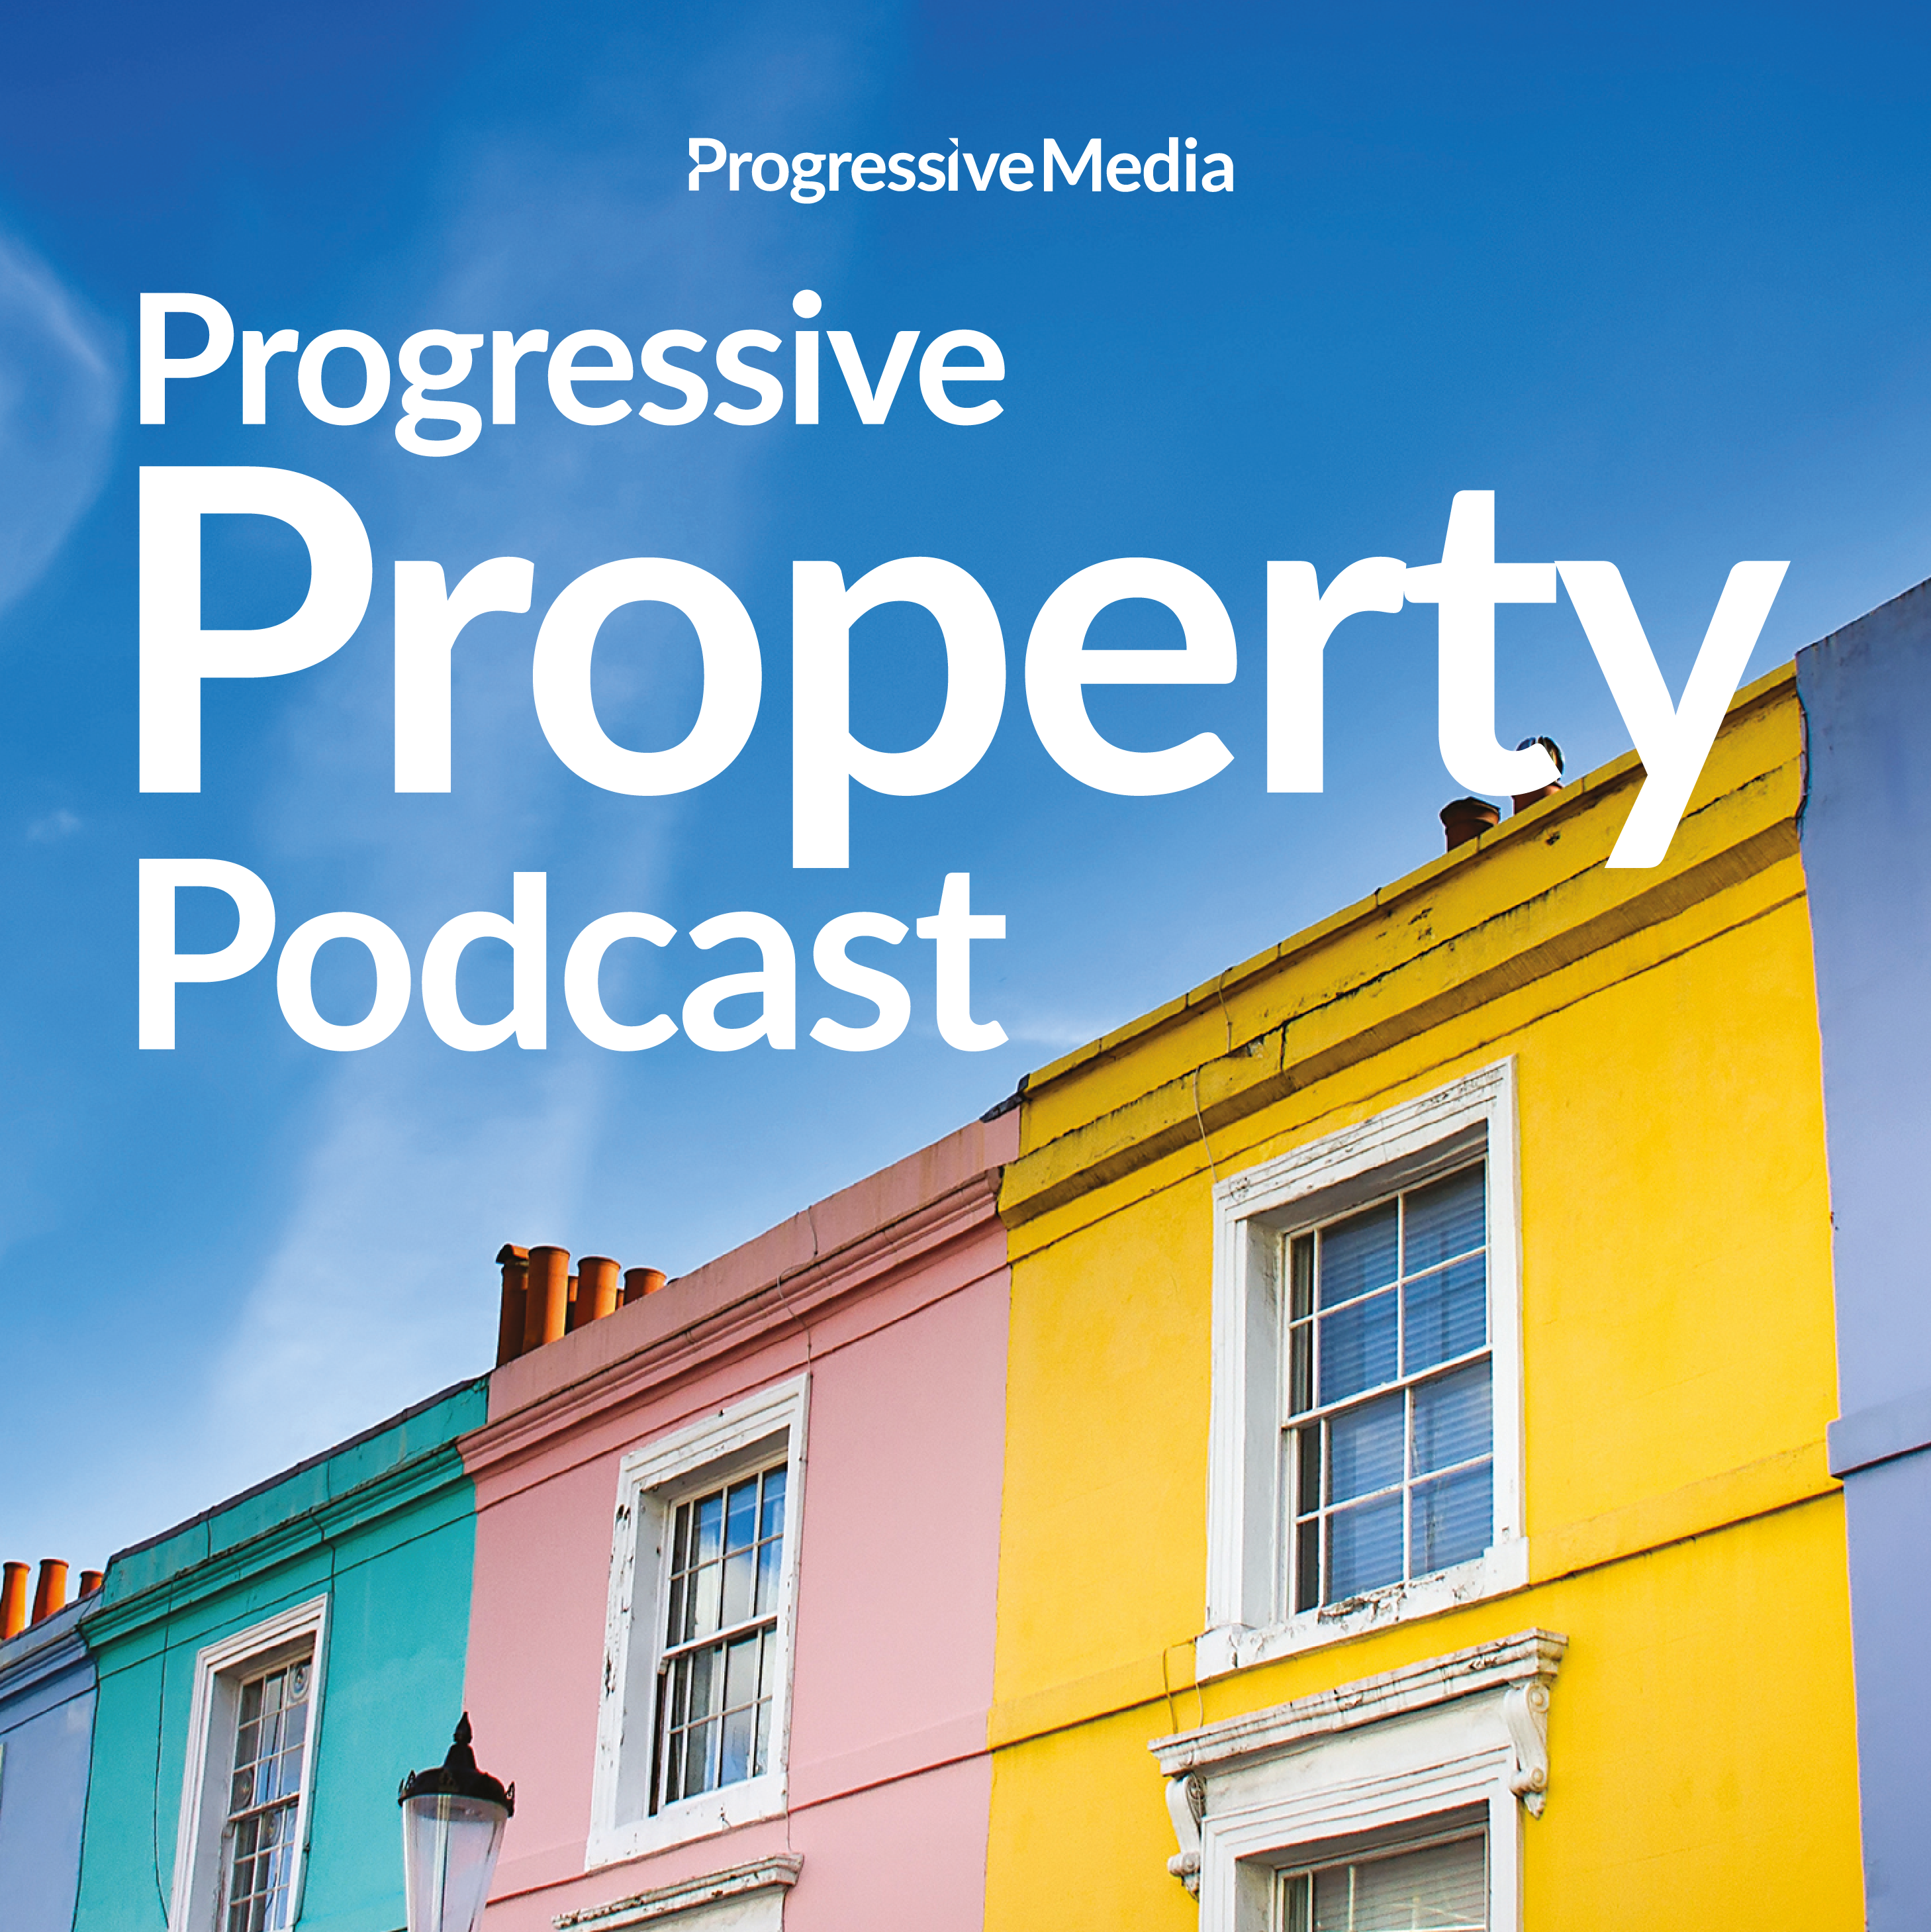 Working on Building Sites to Property Investor | My Property Story